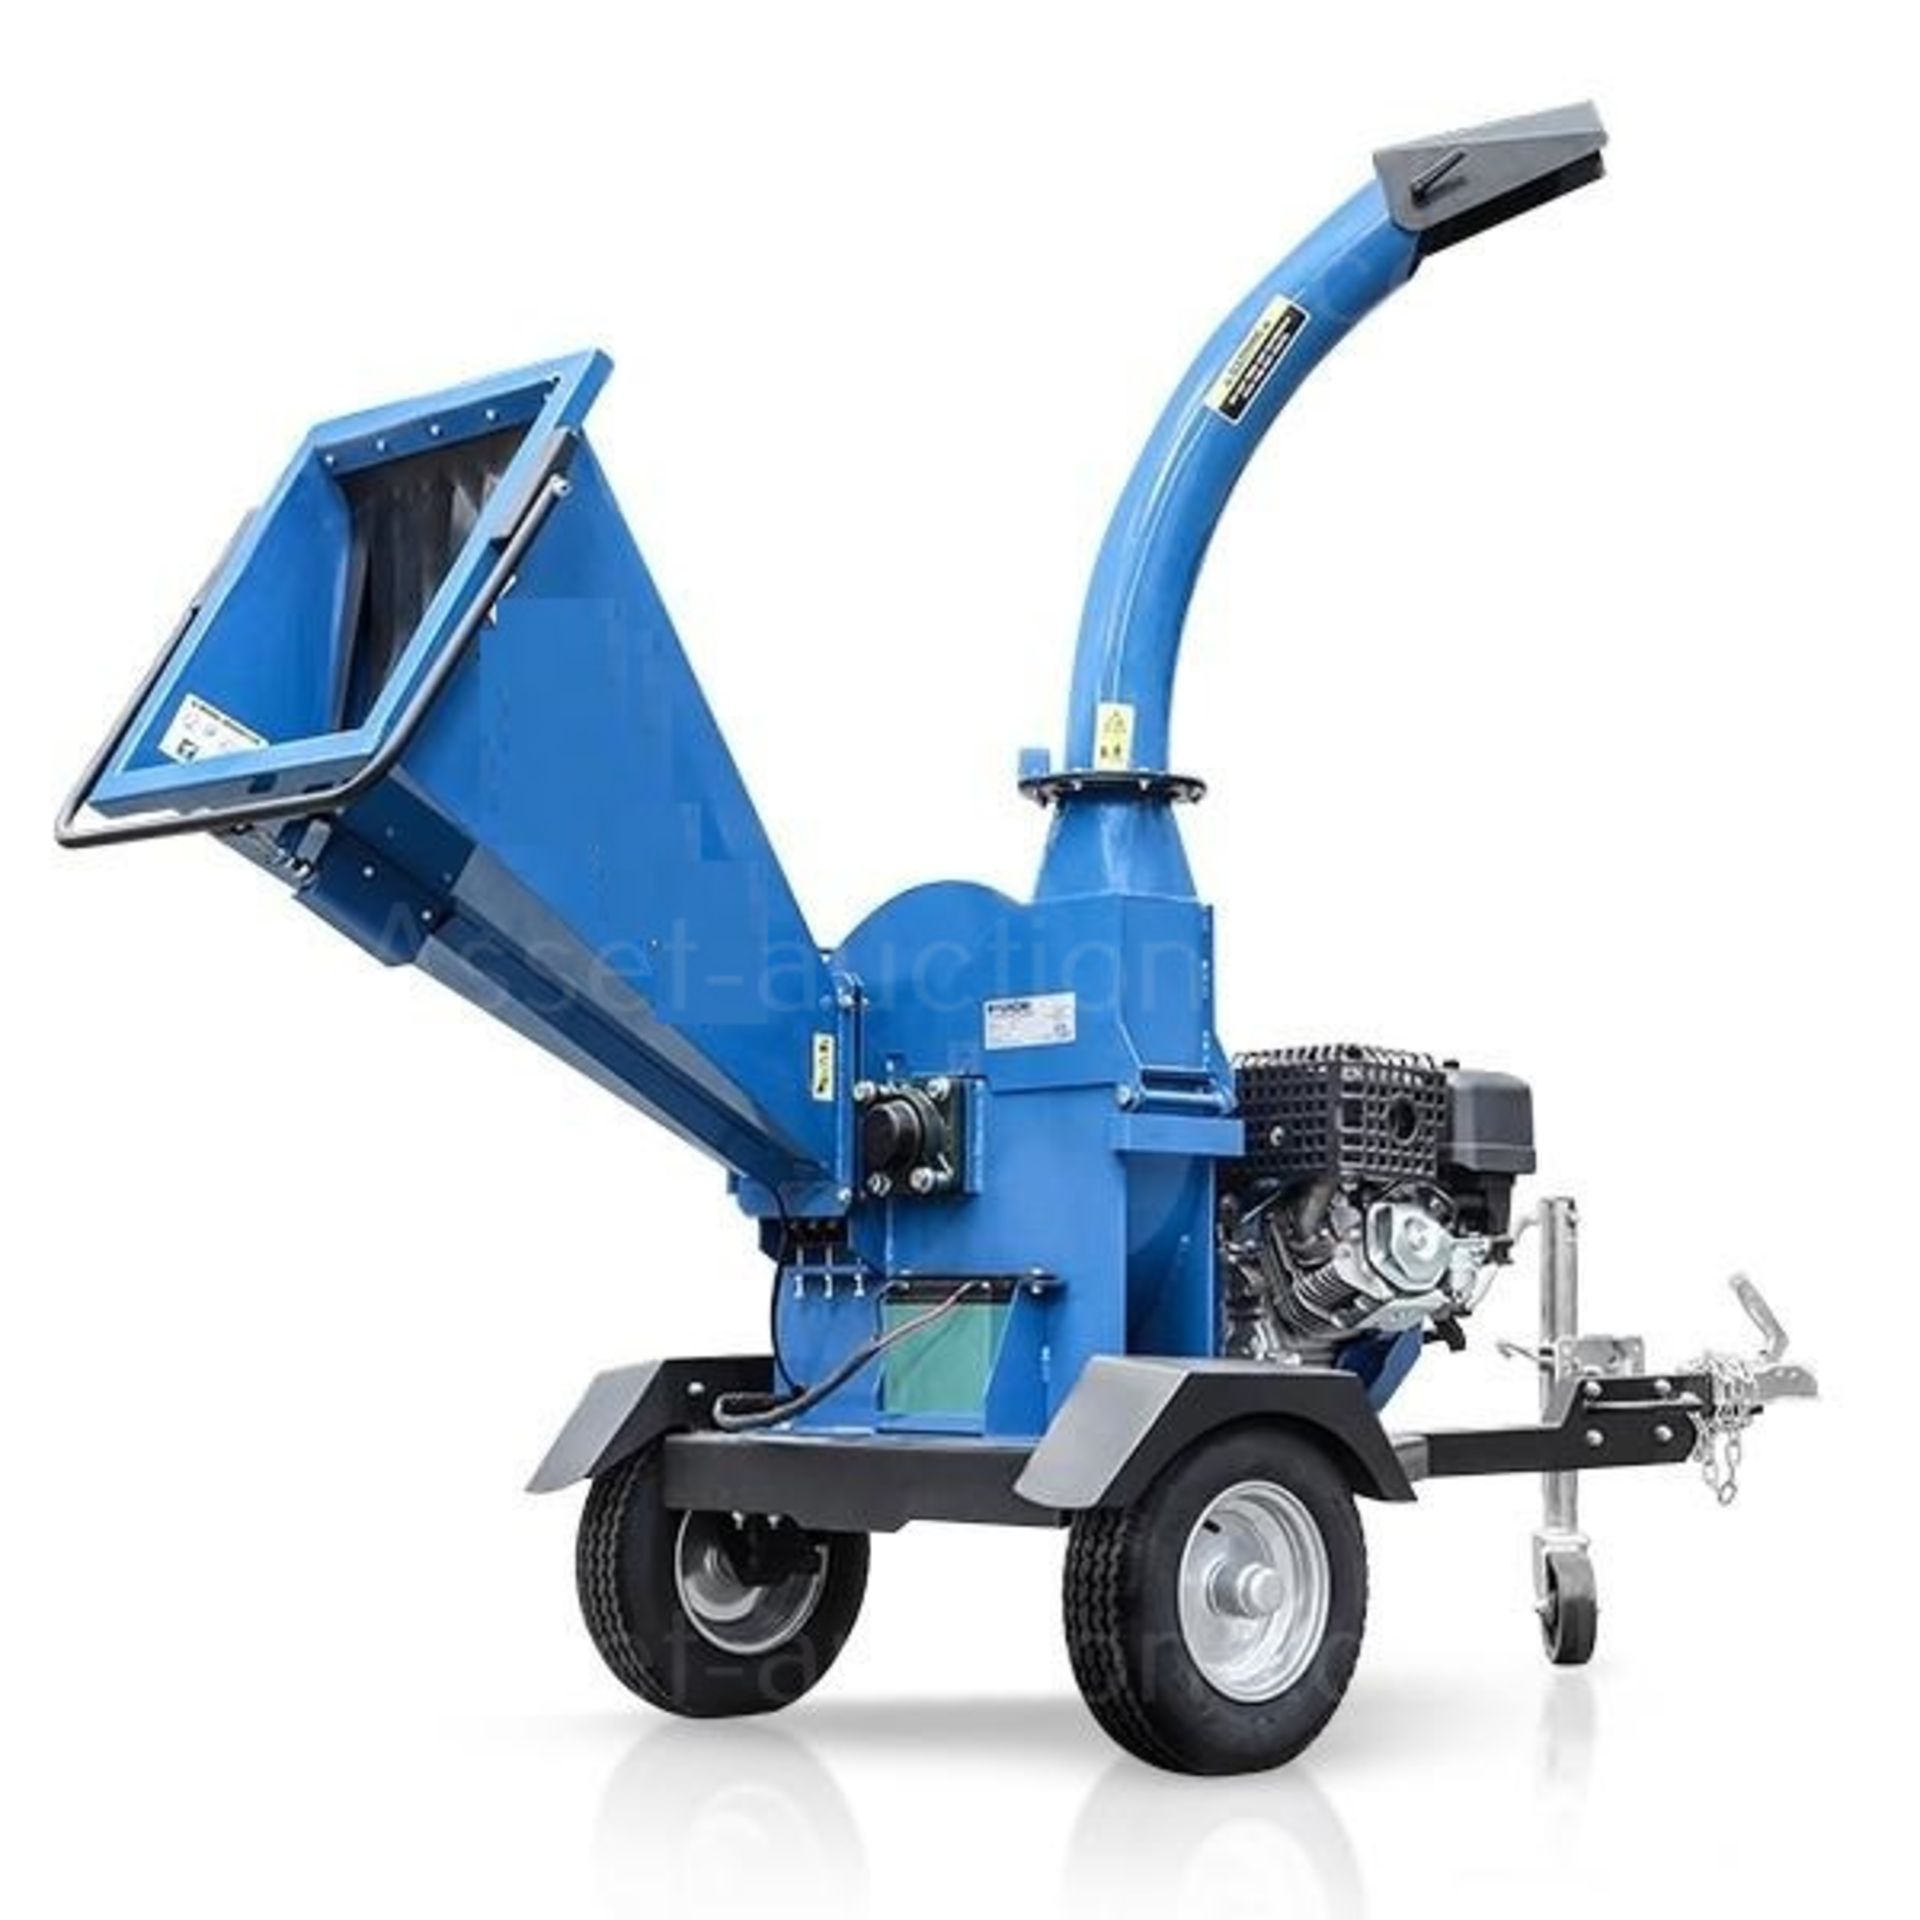 NEW AND UNUSED 15100TE 420cc 4.5" TOWABLE PETROL WOOD CHIPPER, RRP OVER £2400 *PLUS VAT* - Image 6 of 10